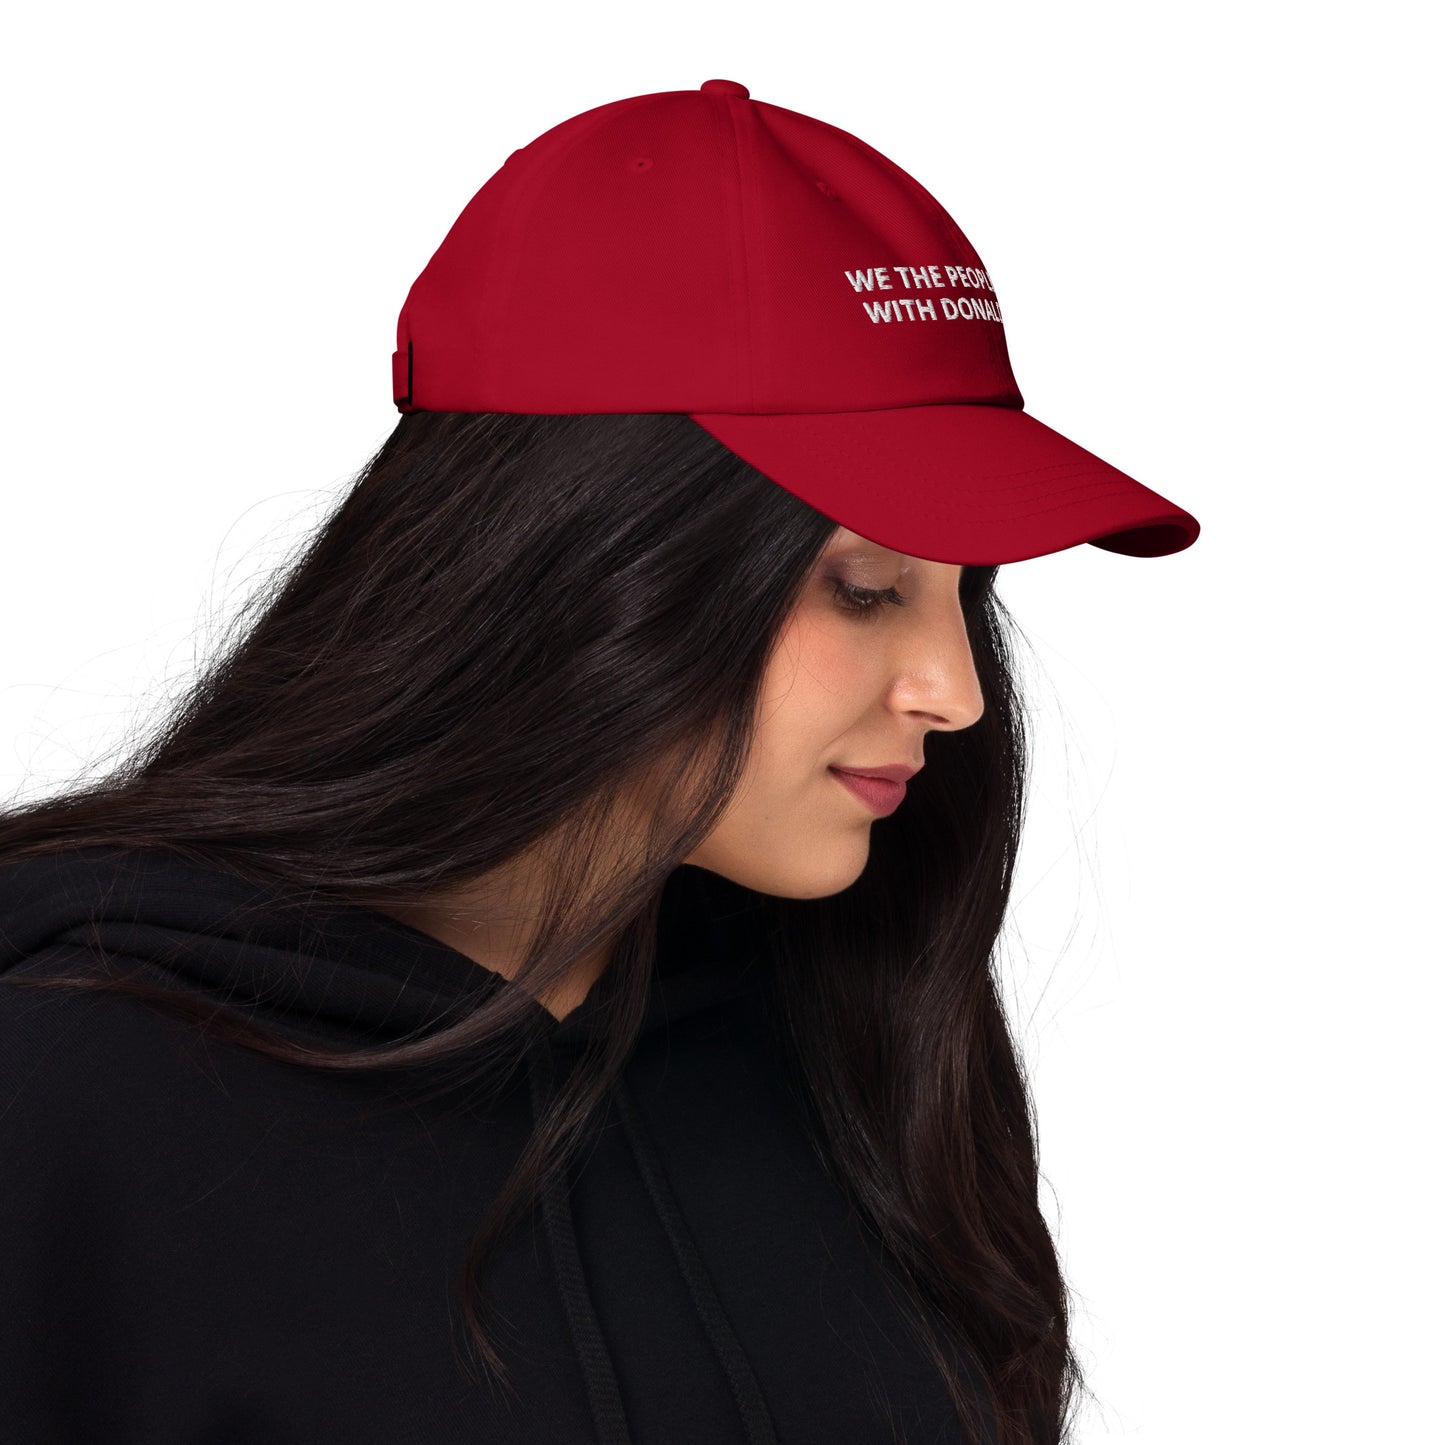 WE THE PEOPLE STAND WITH DONALD TRUMP  hat